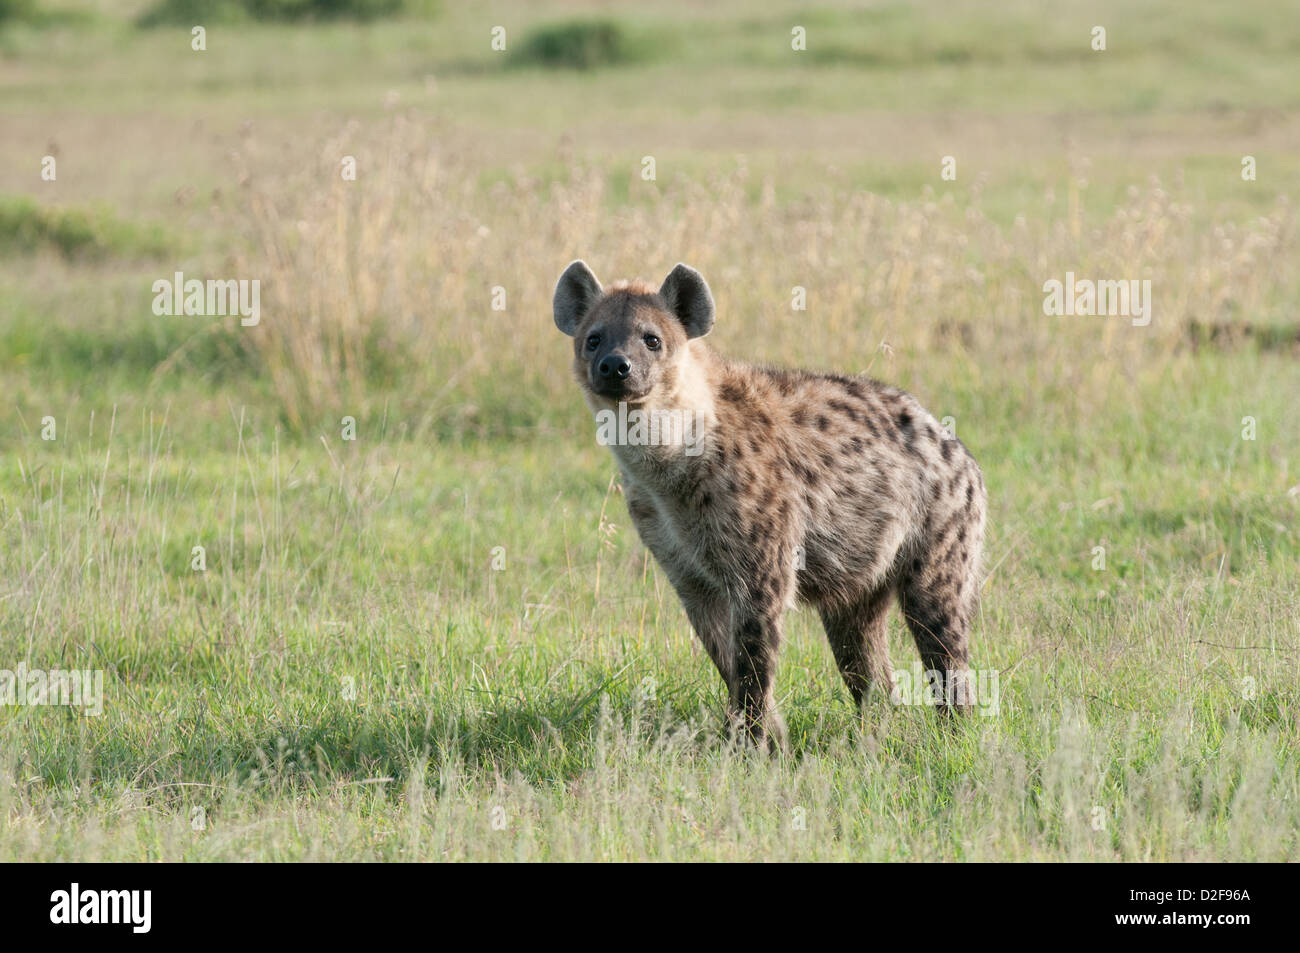 Spotted hyaena standing in grassland looking towards viewer Stock Photo